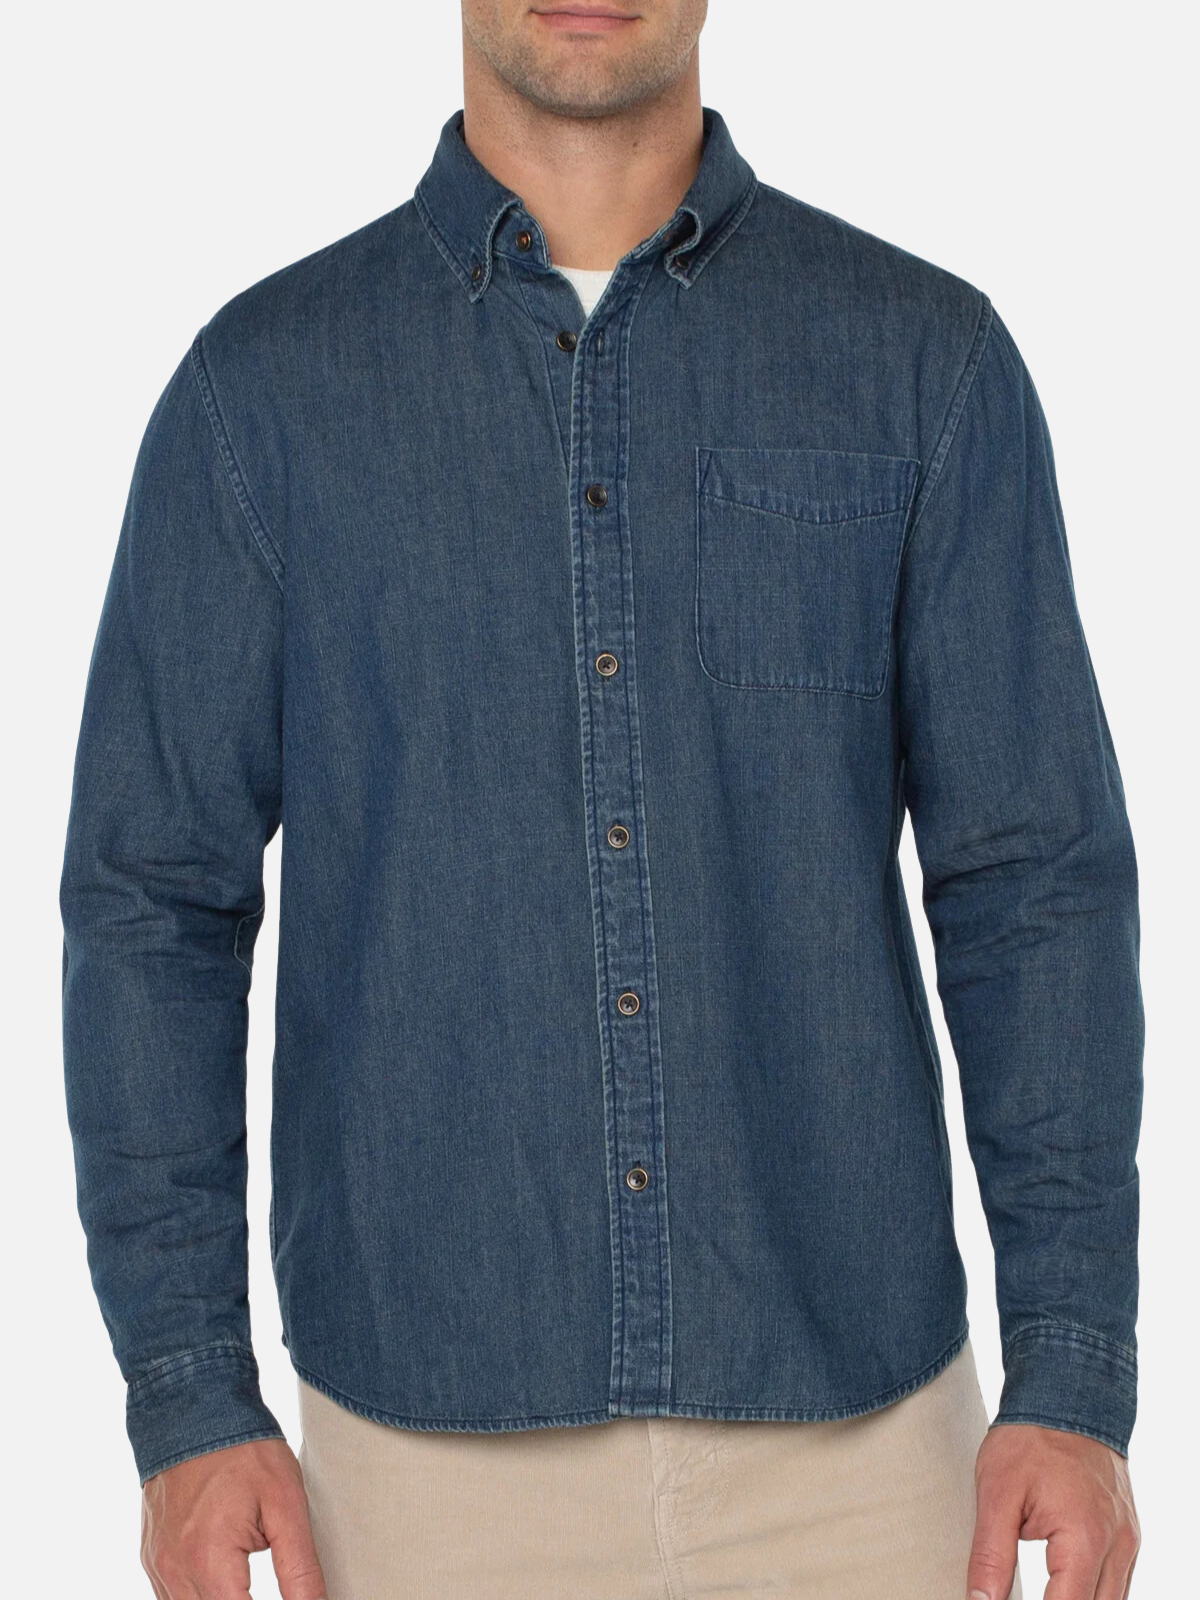 Liverpool Woven Button Up Shirt - Vintage Chambray